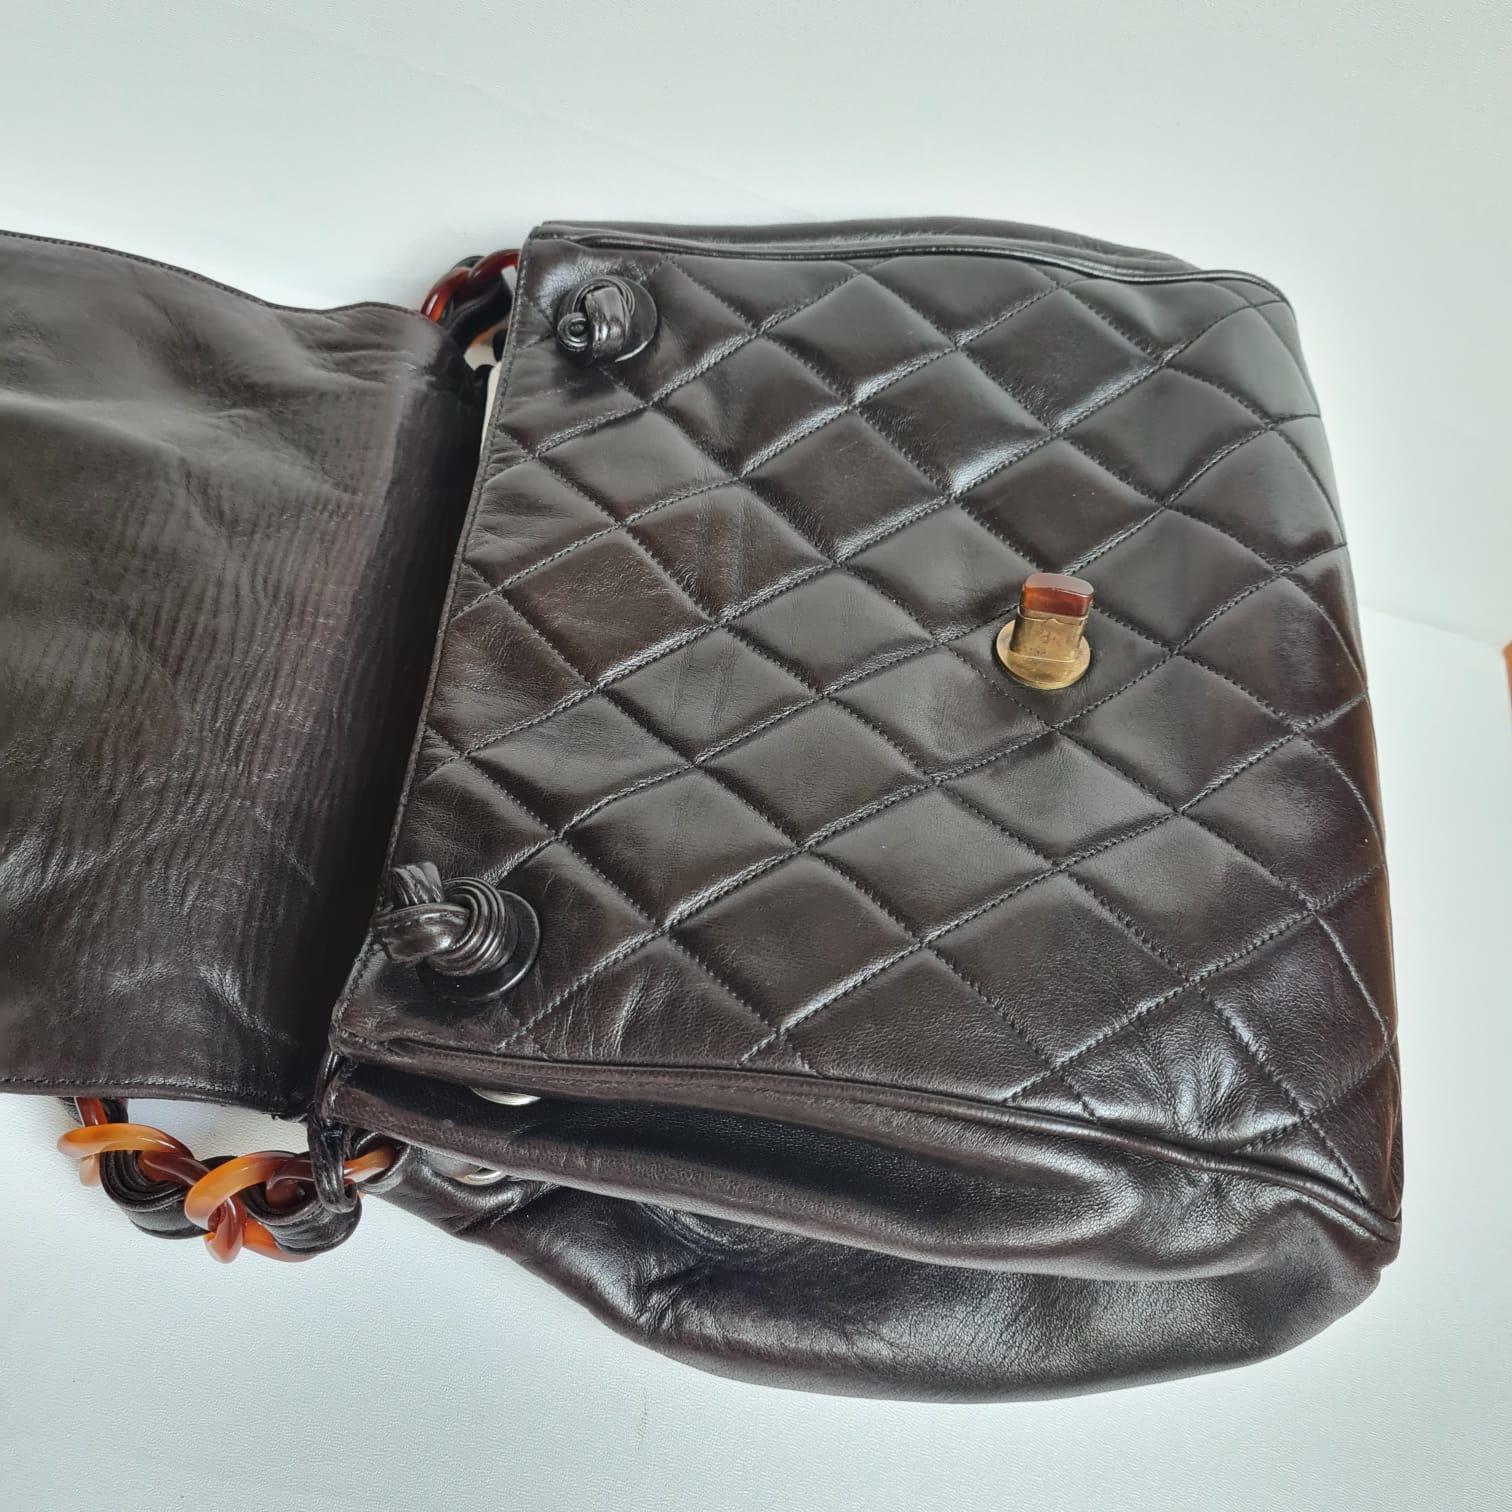 Rare Vintage 1990s Chanel Black Quilted Tortoiseshell Round Flap Bag For Sale 3